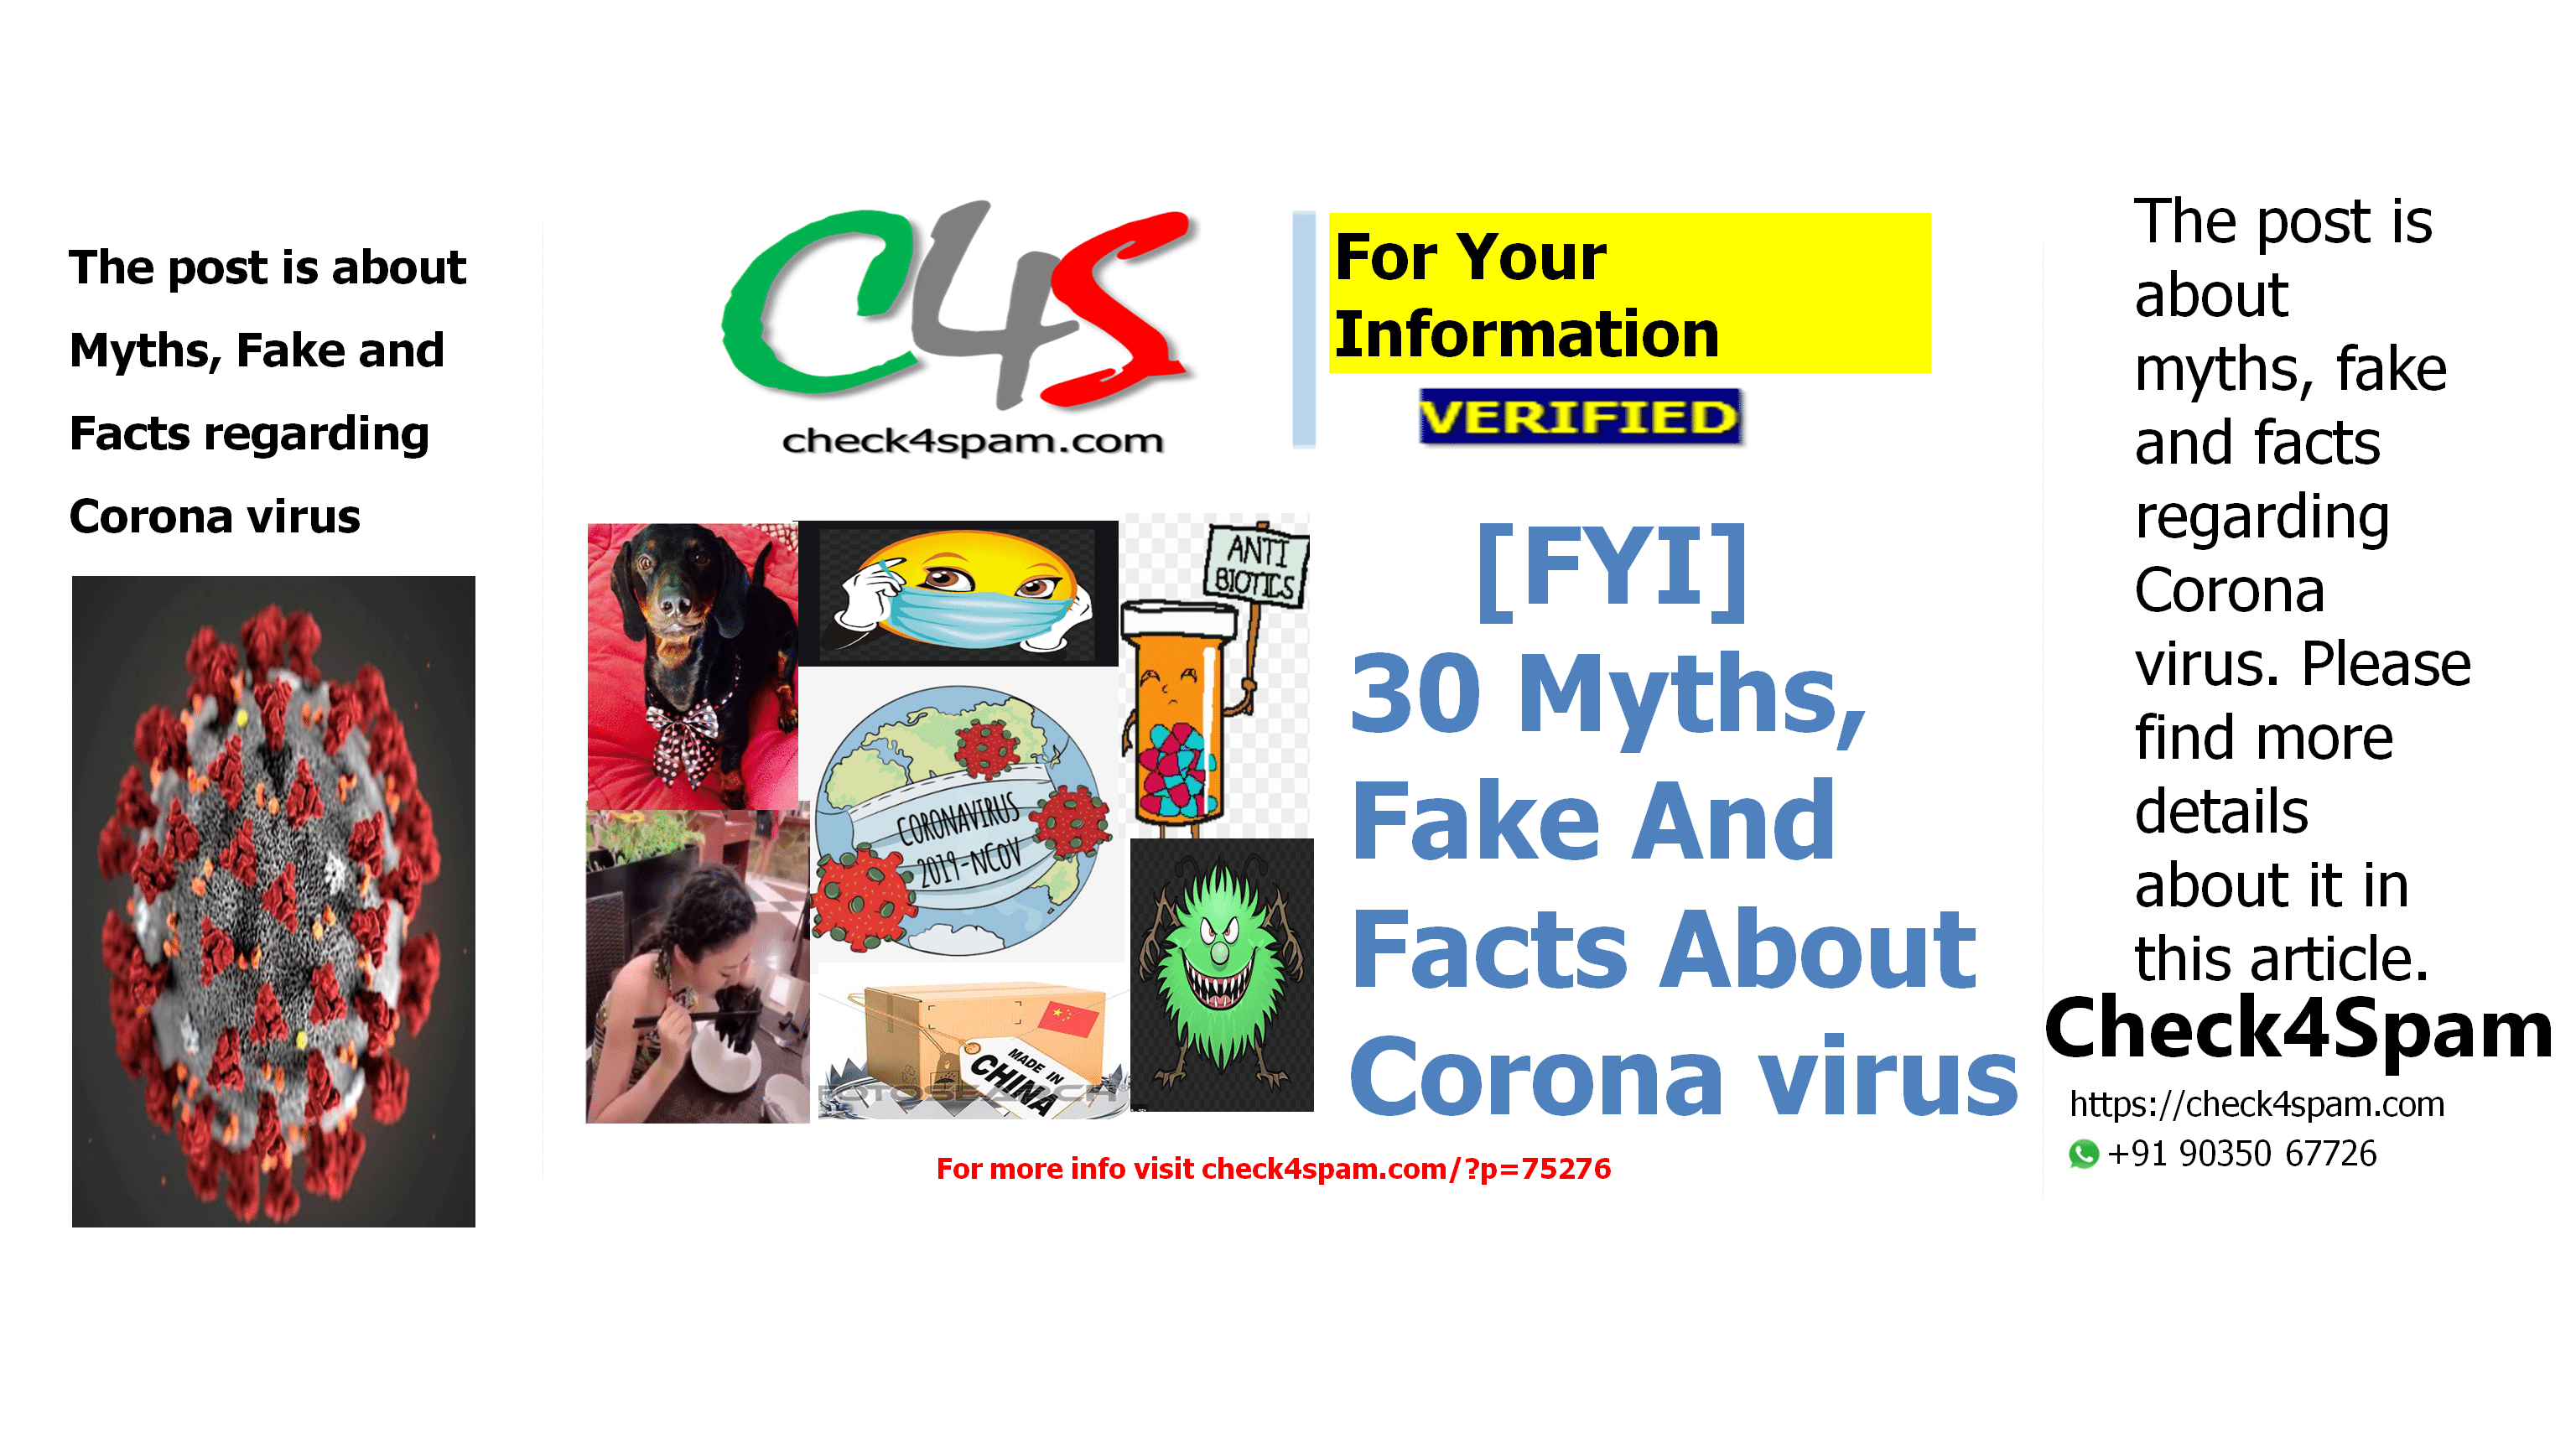 30 Myths, Fake And Facts About Corona virus